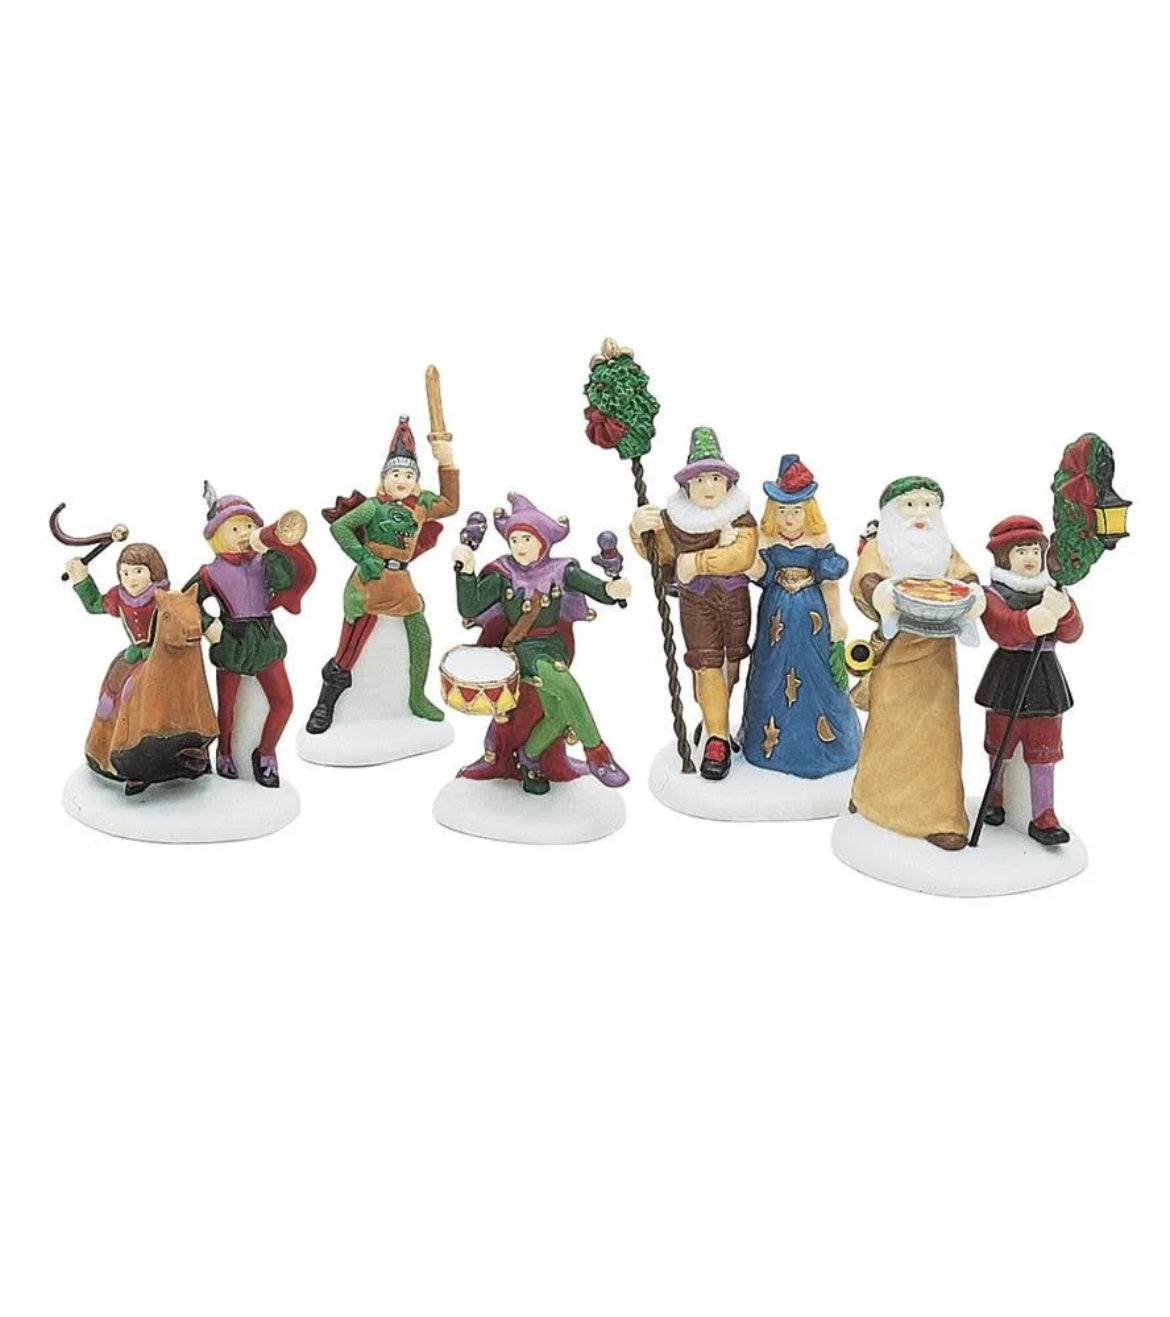 Department 56 - Heritage Village - Here We Come-A-Wassailing